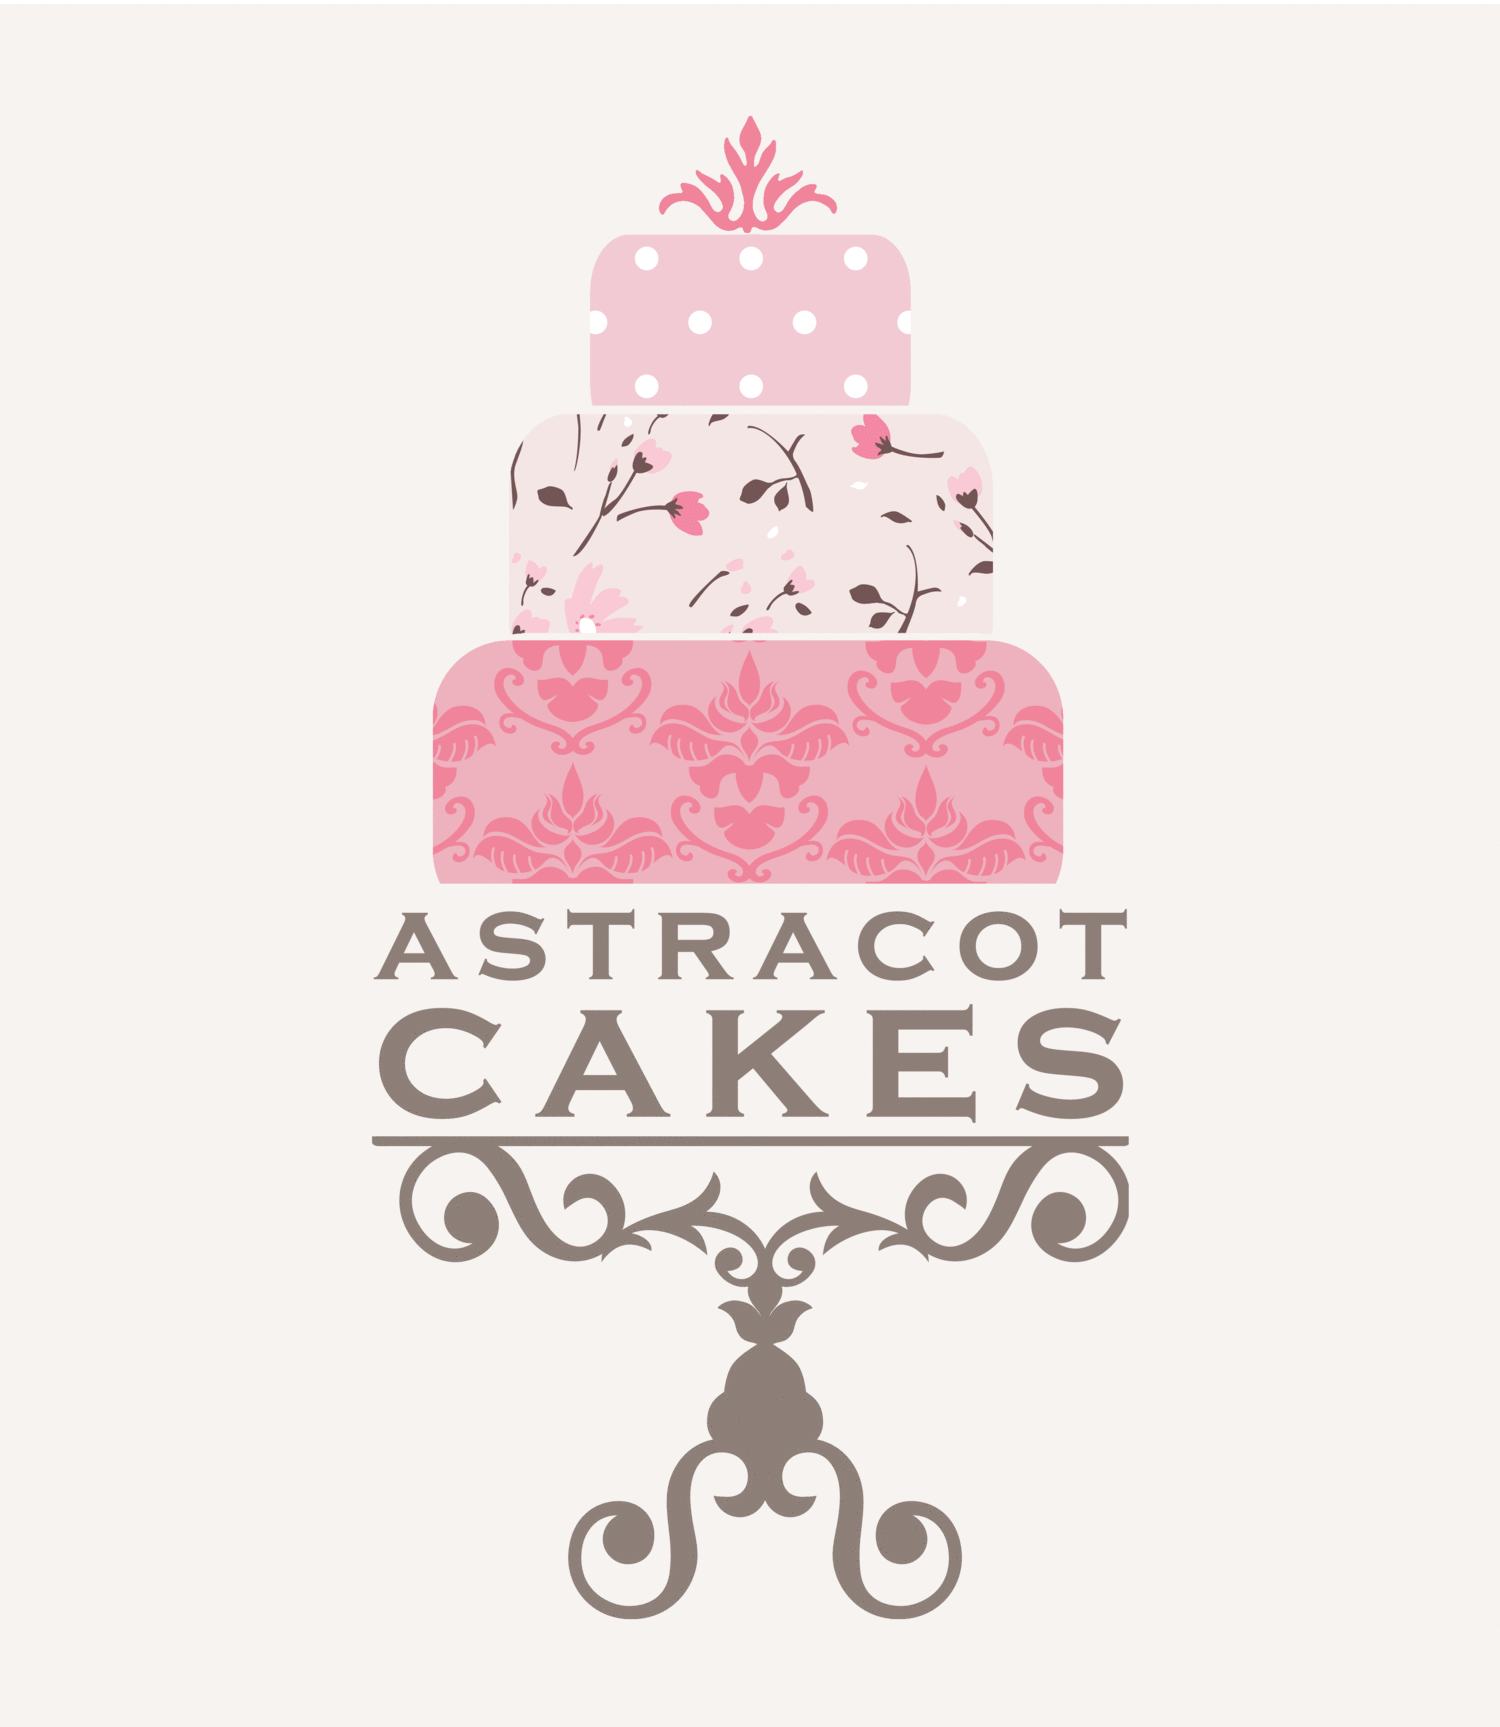 Astracot Cakes